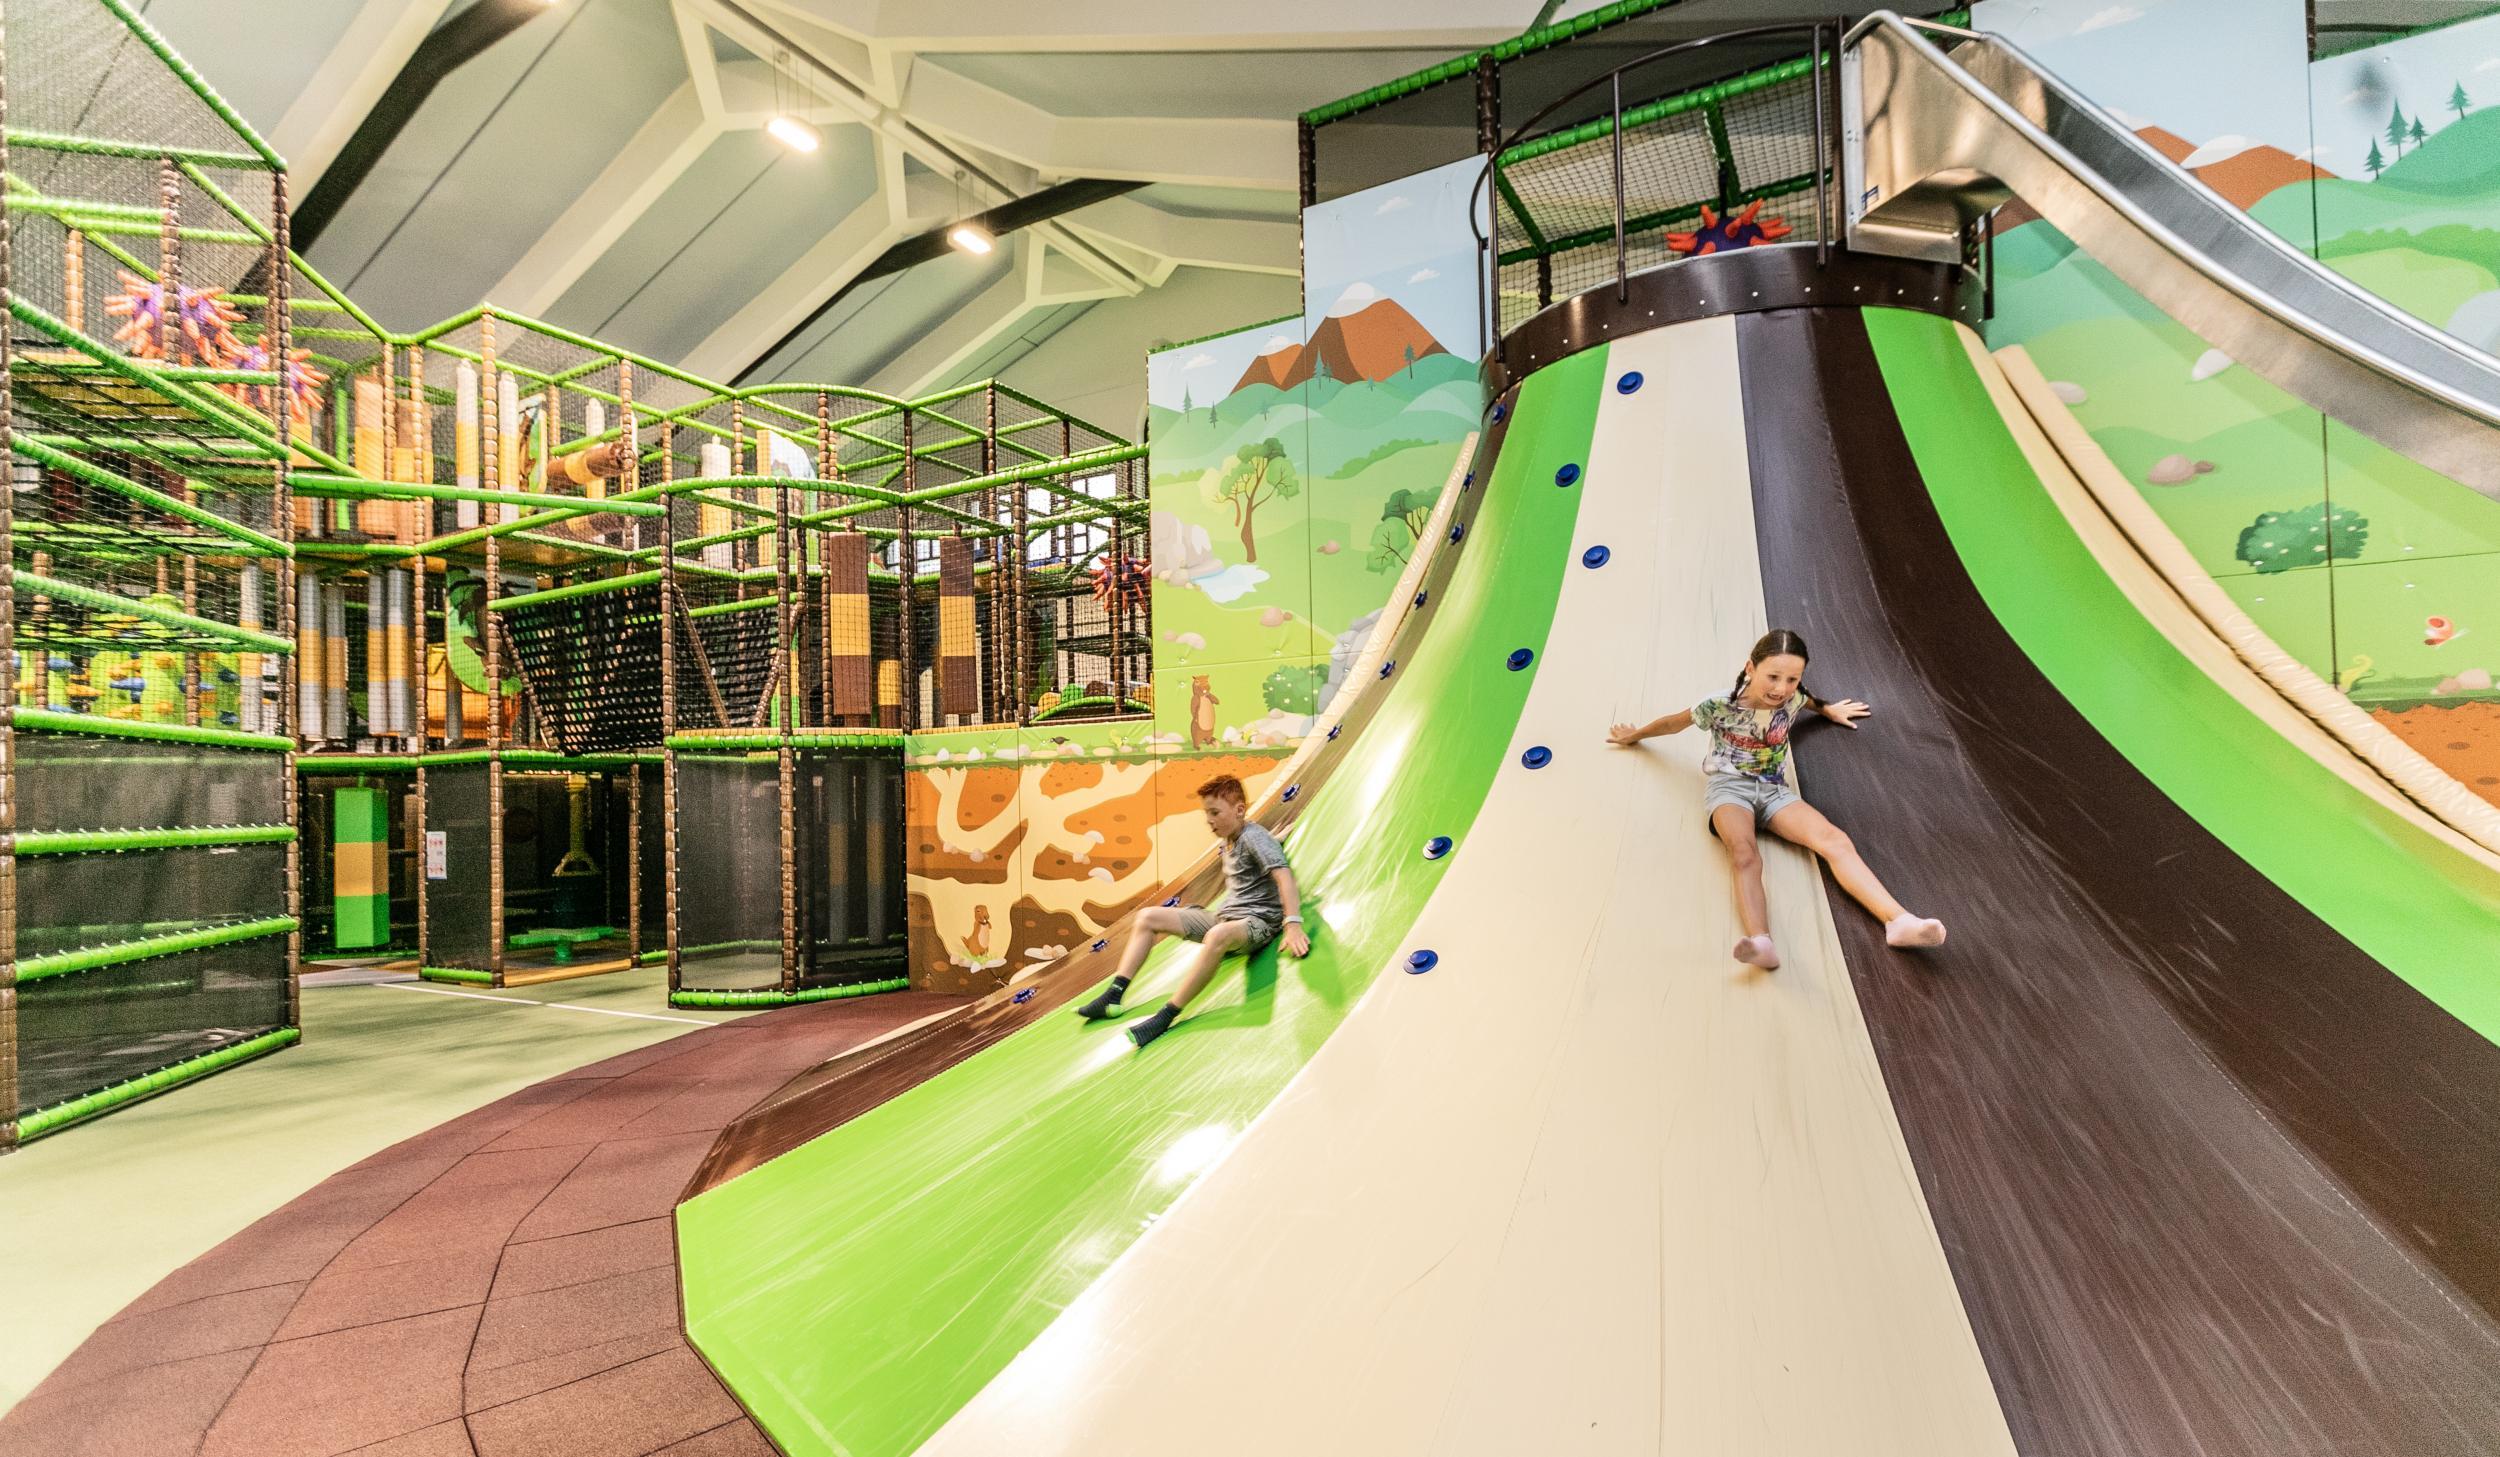 Children aged 10 and under will have a whale of a time Murmi’s Kinderland in Kirchdorf